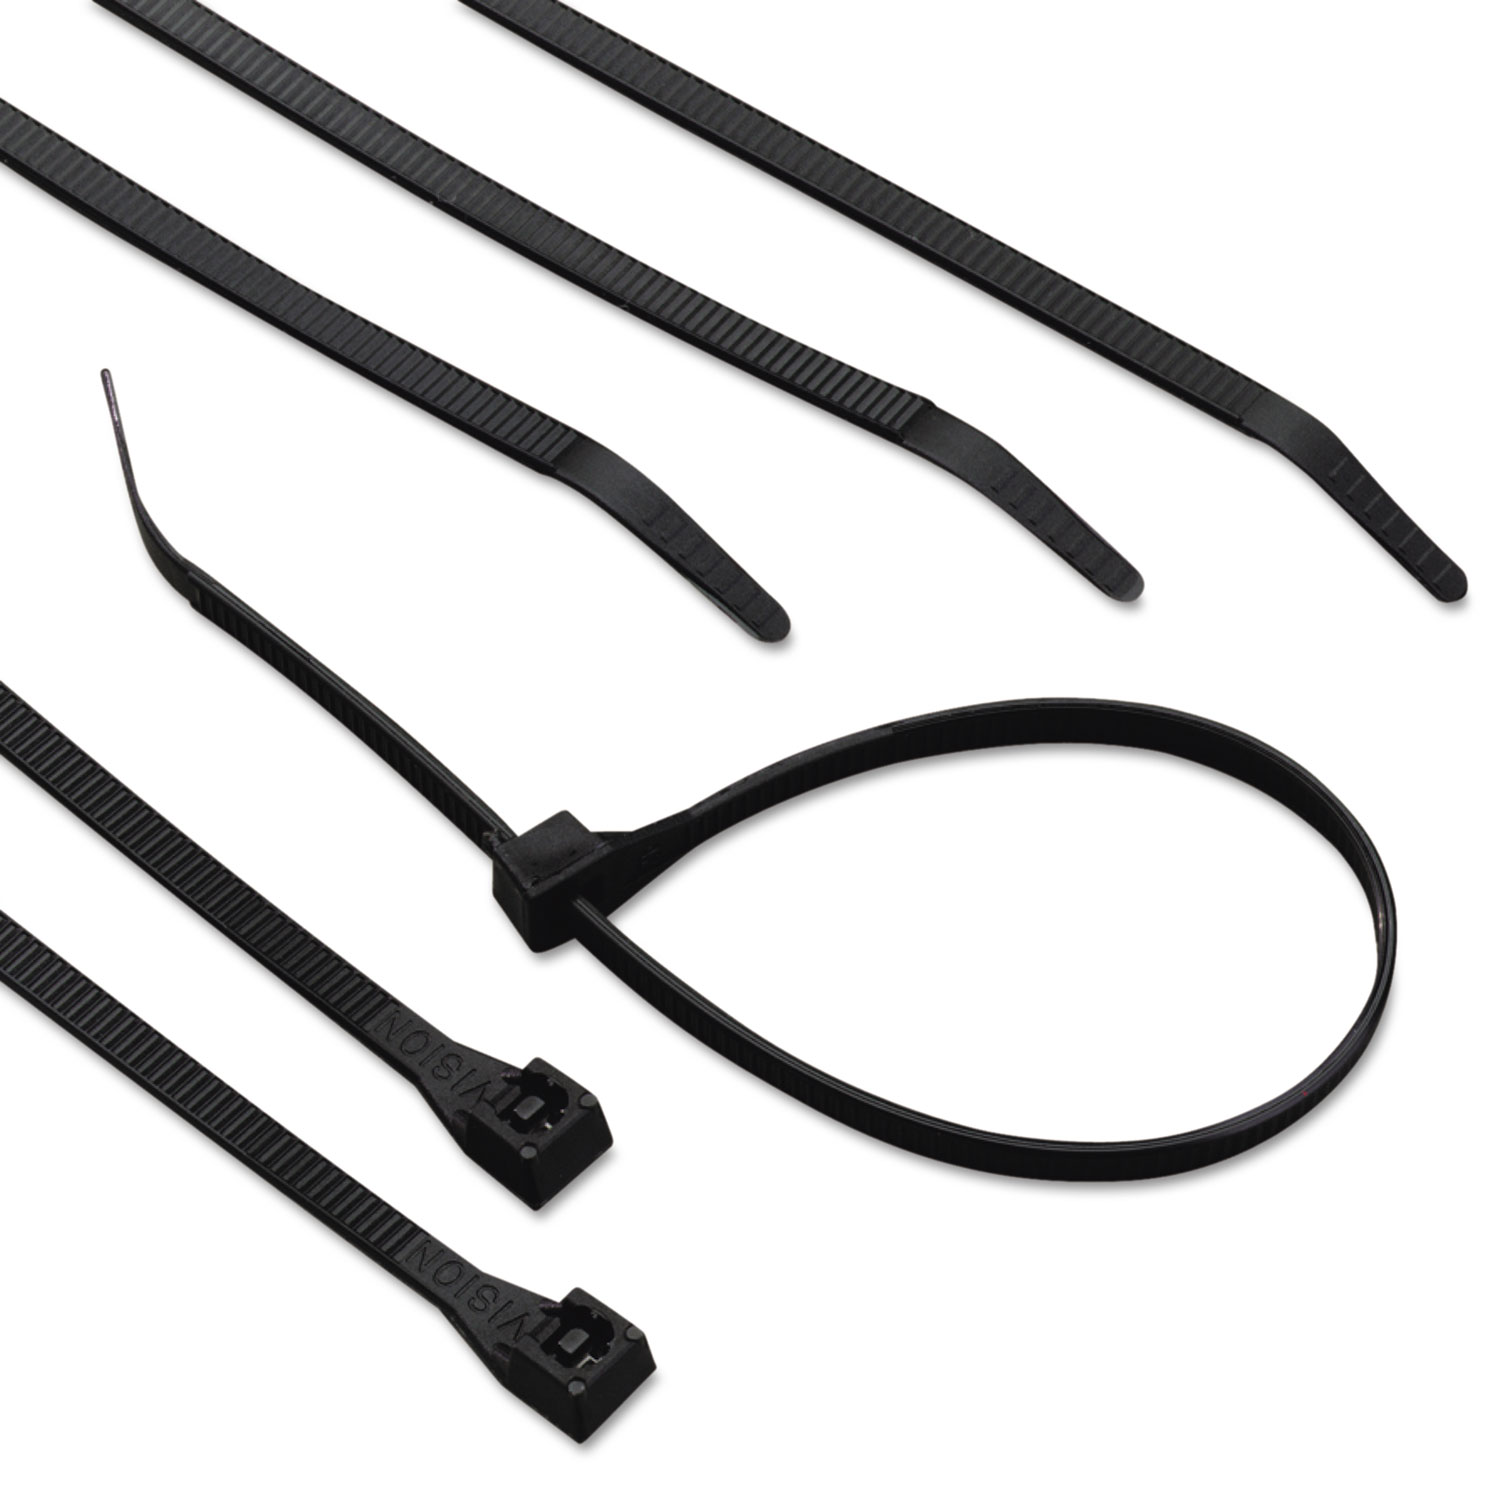 UVB Heavy-Duty Cable Ties, 15